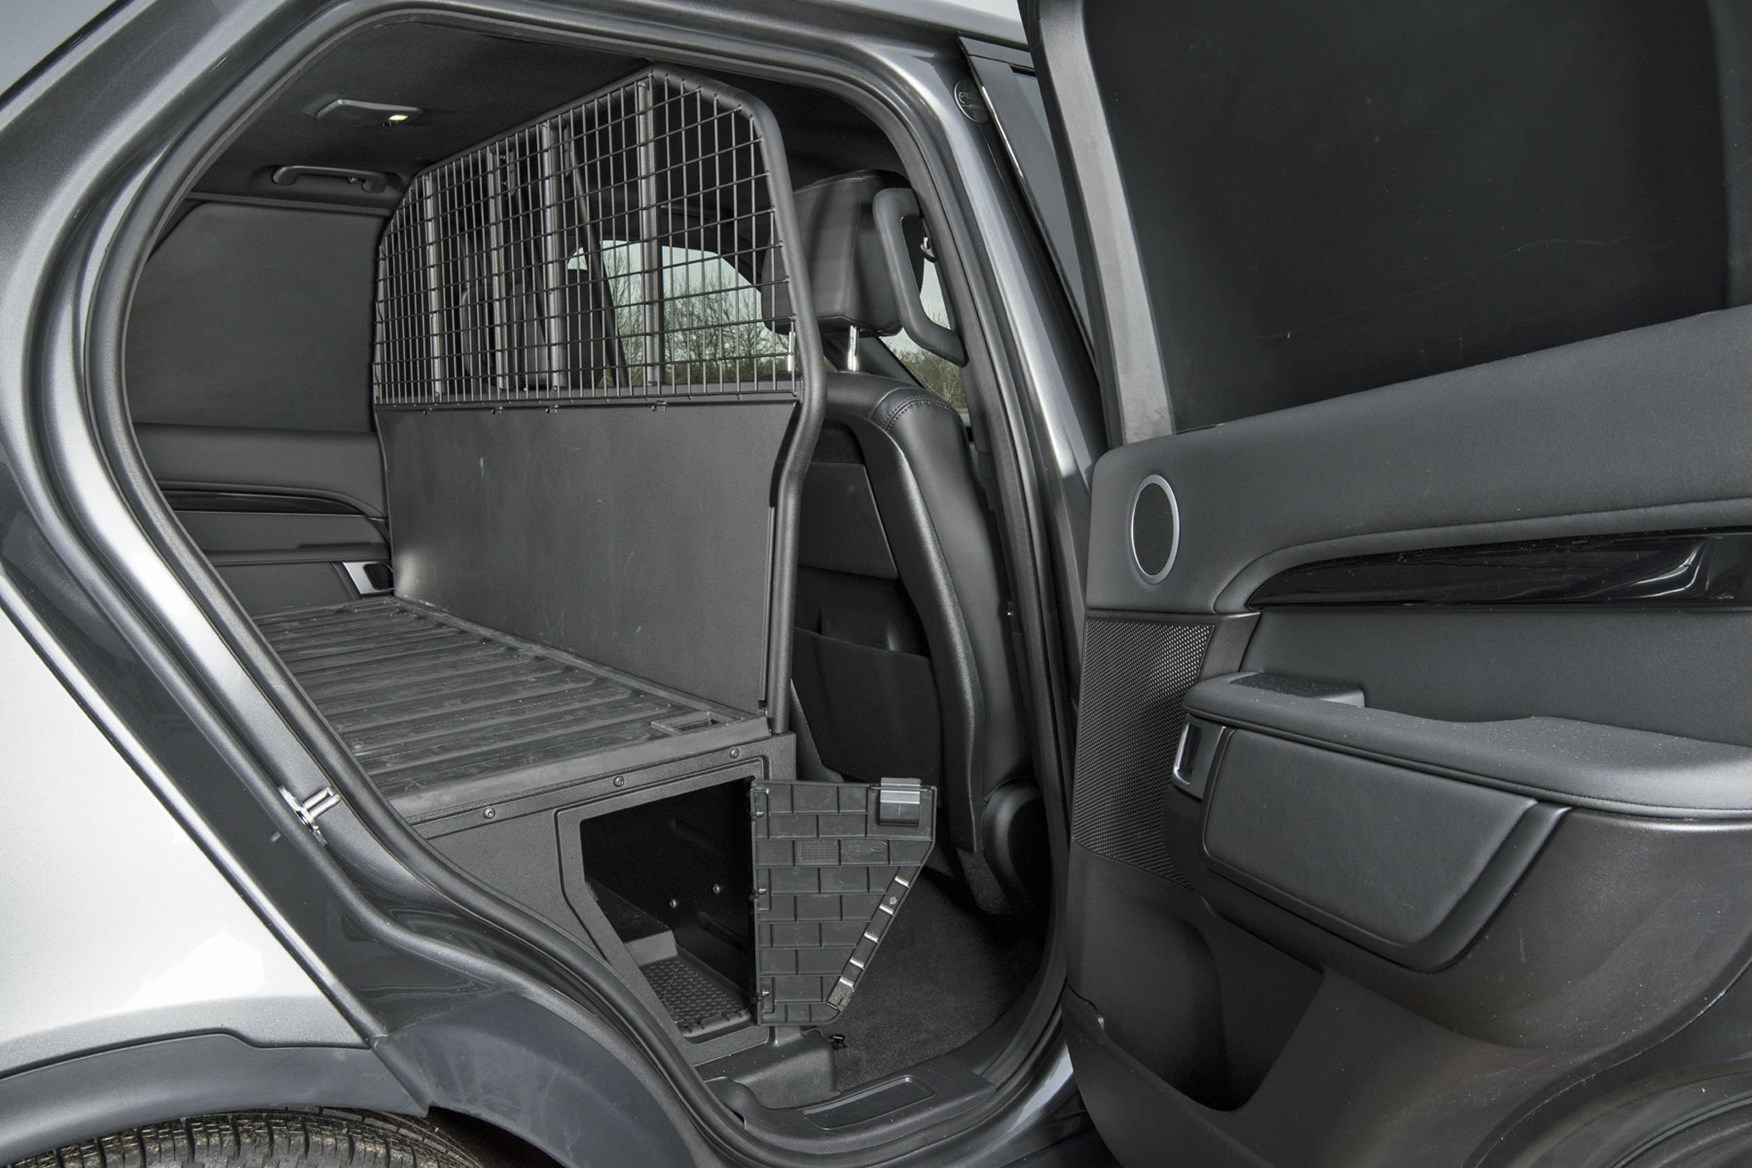 Land Rover Discovery Commercial - underfloor storage accessed through side doors